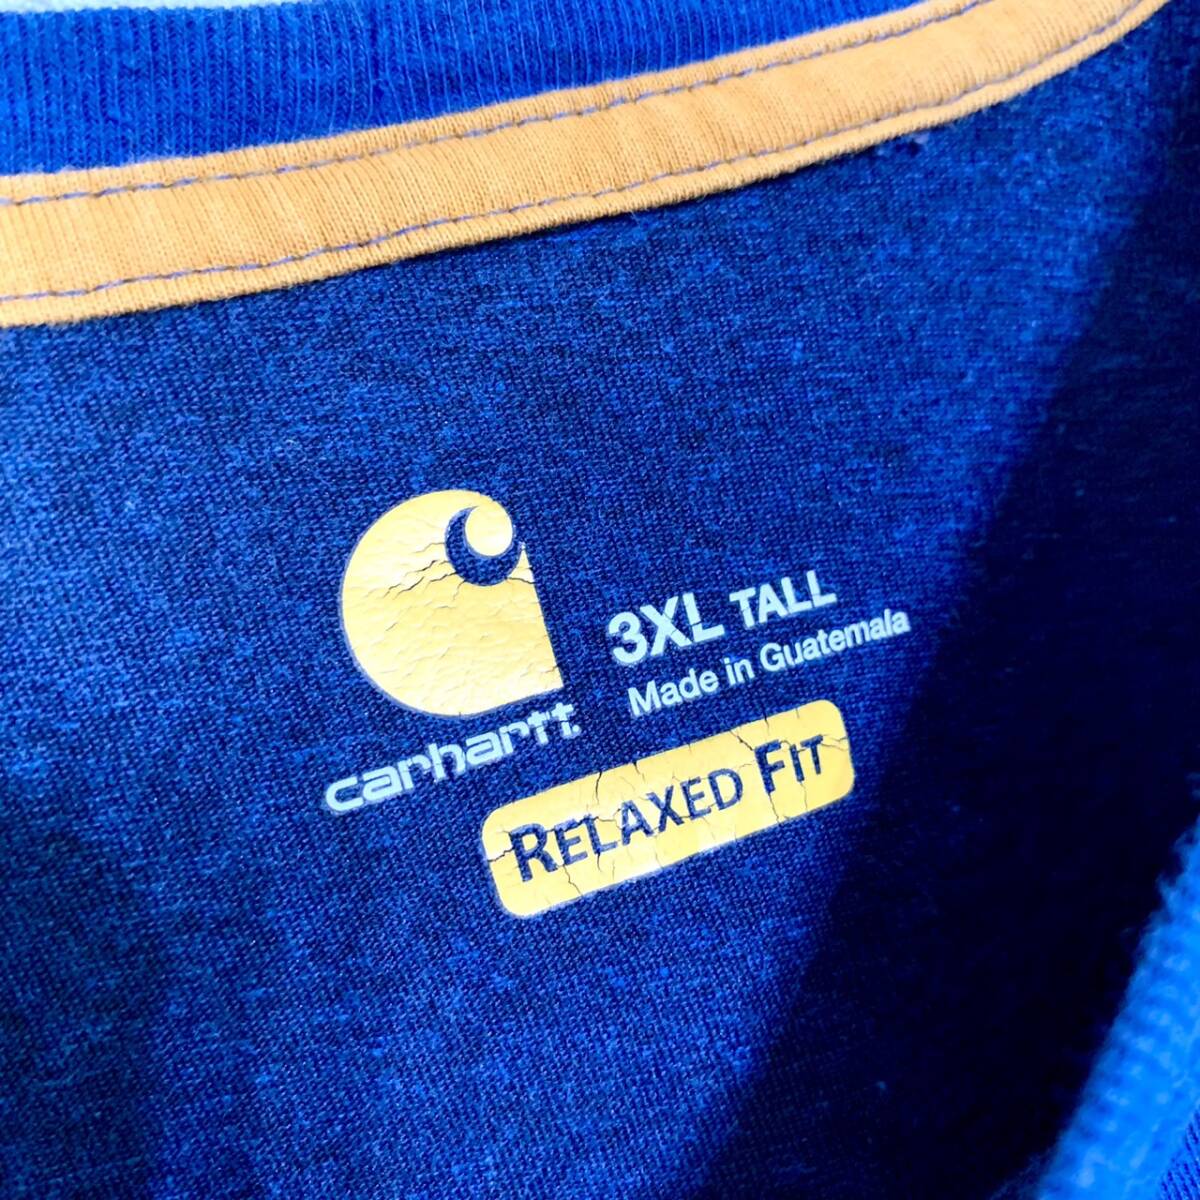 Carhartt カーハート ロゴポケット半袖Tシャツ カットソー RELAXED FIT FORCE ブルー 3XL TALLの画像5